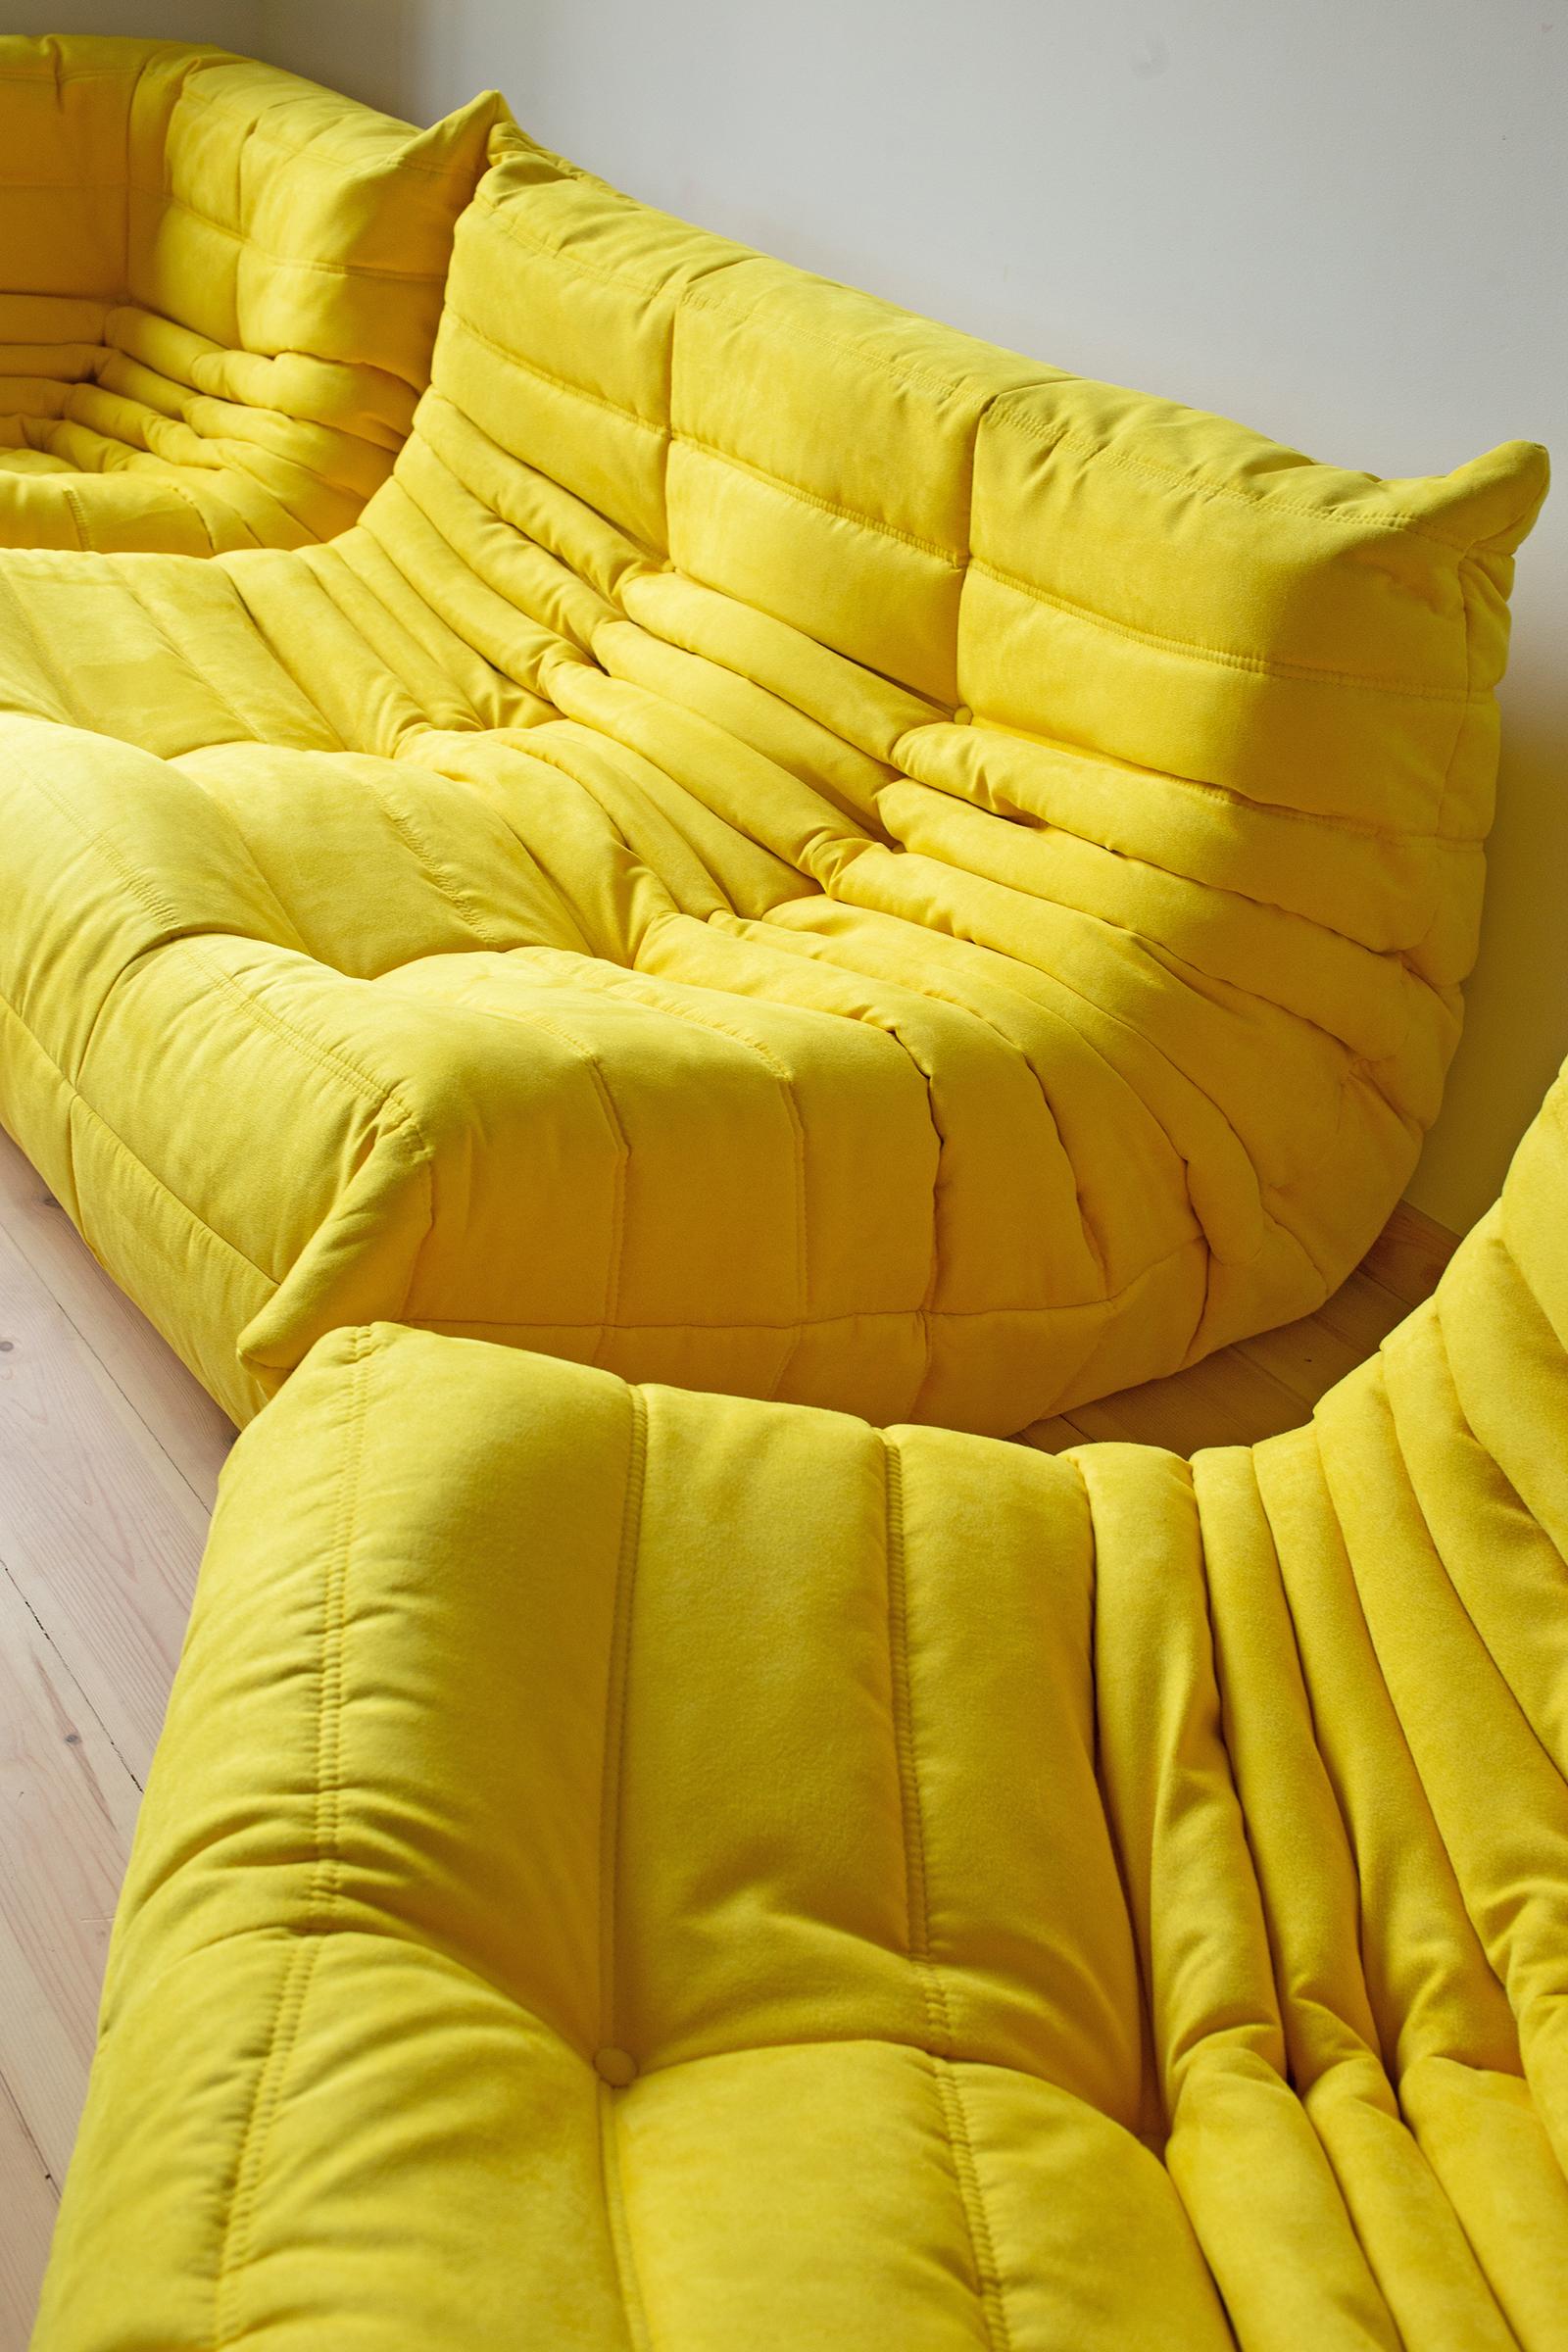 Togo Sofa Set by Michel Ducaroy for Ligne Roset, in Yellow Microfibre In Excellent Condition For Sale In Berlin, DE